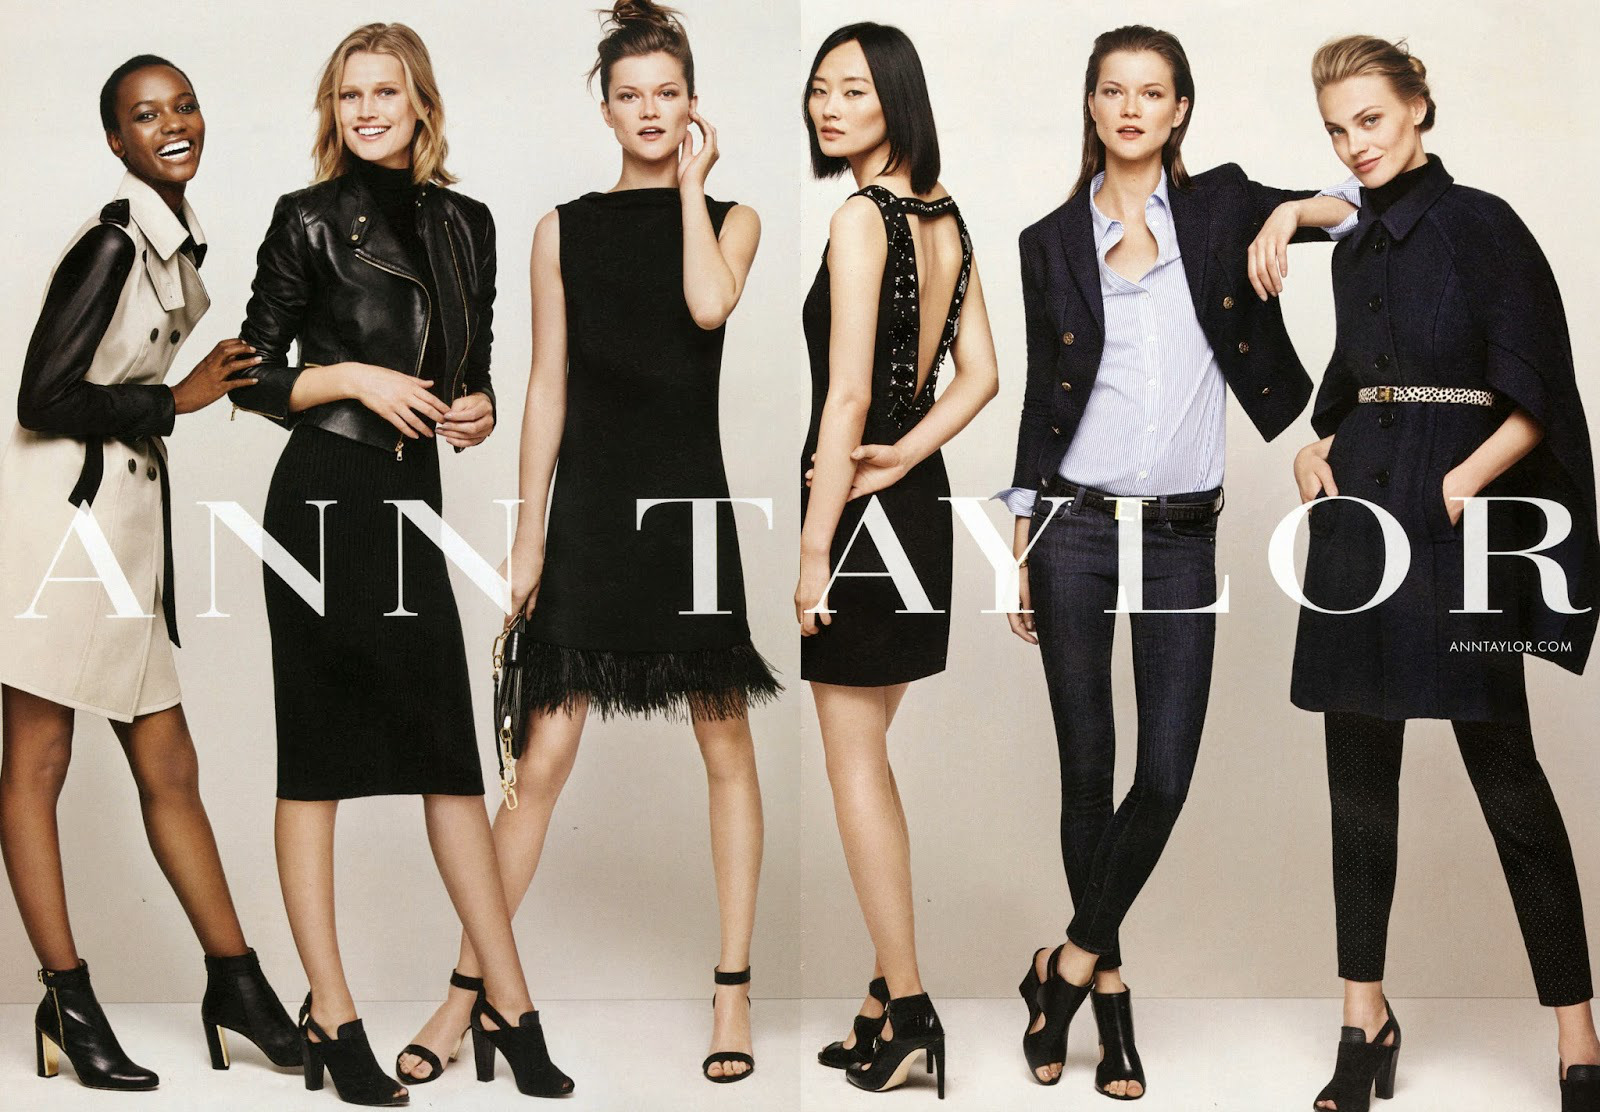 Interested in a brand-name company like Ann Taylor? – Bentley CareerEdge